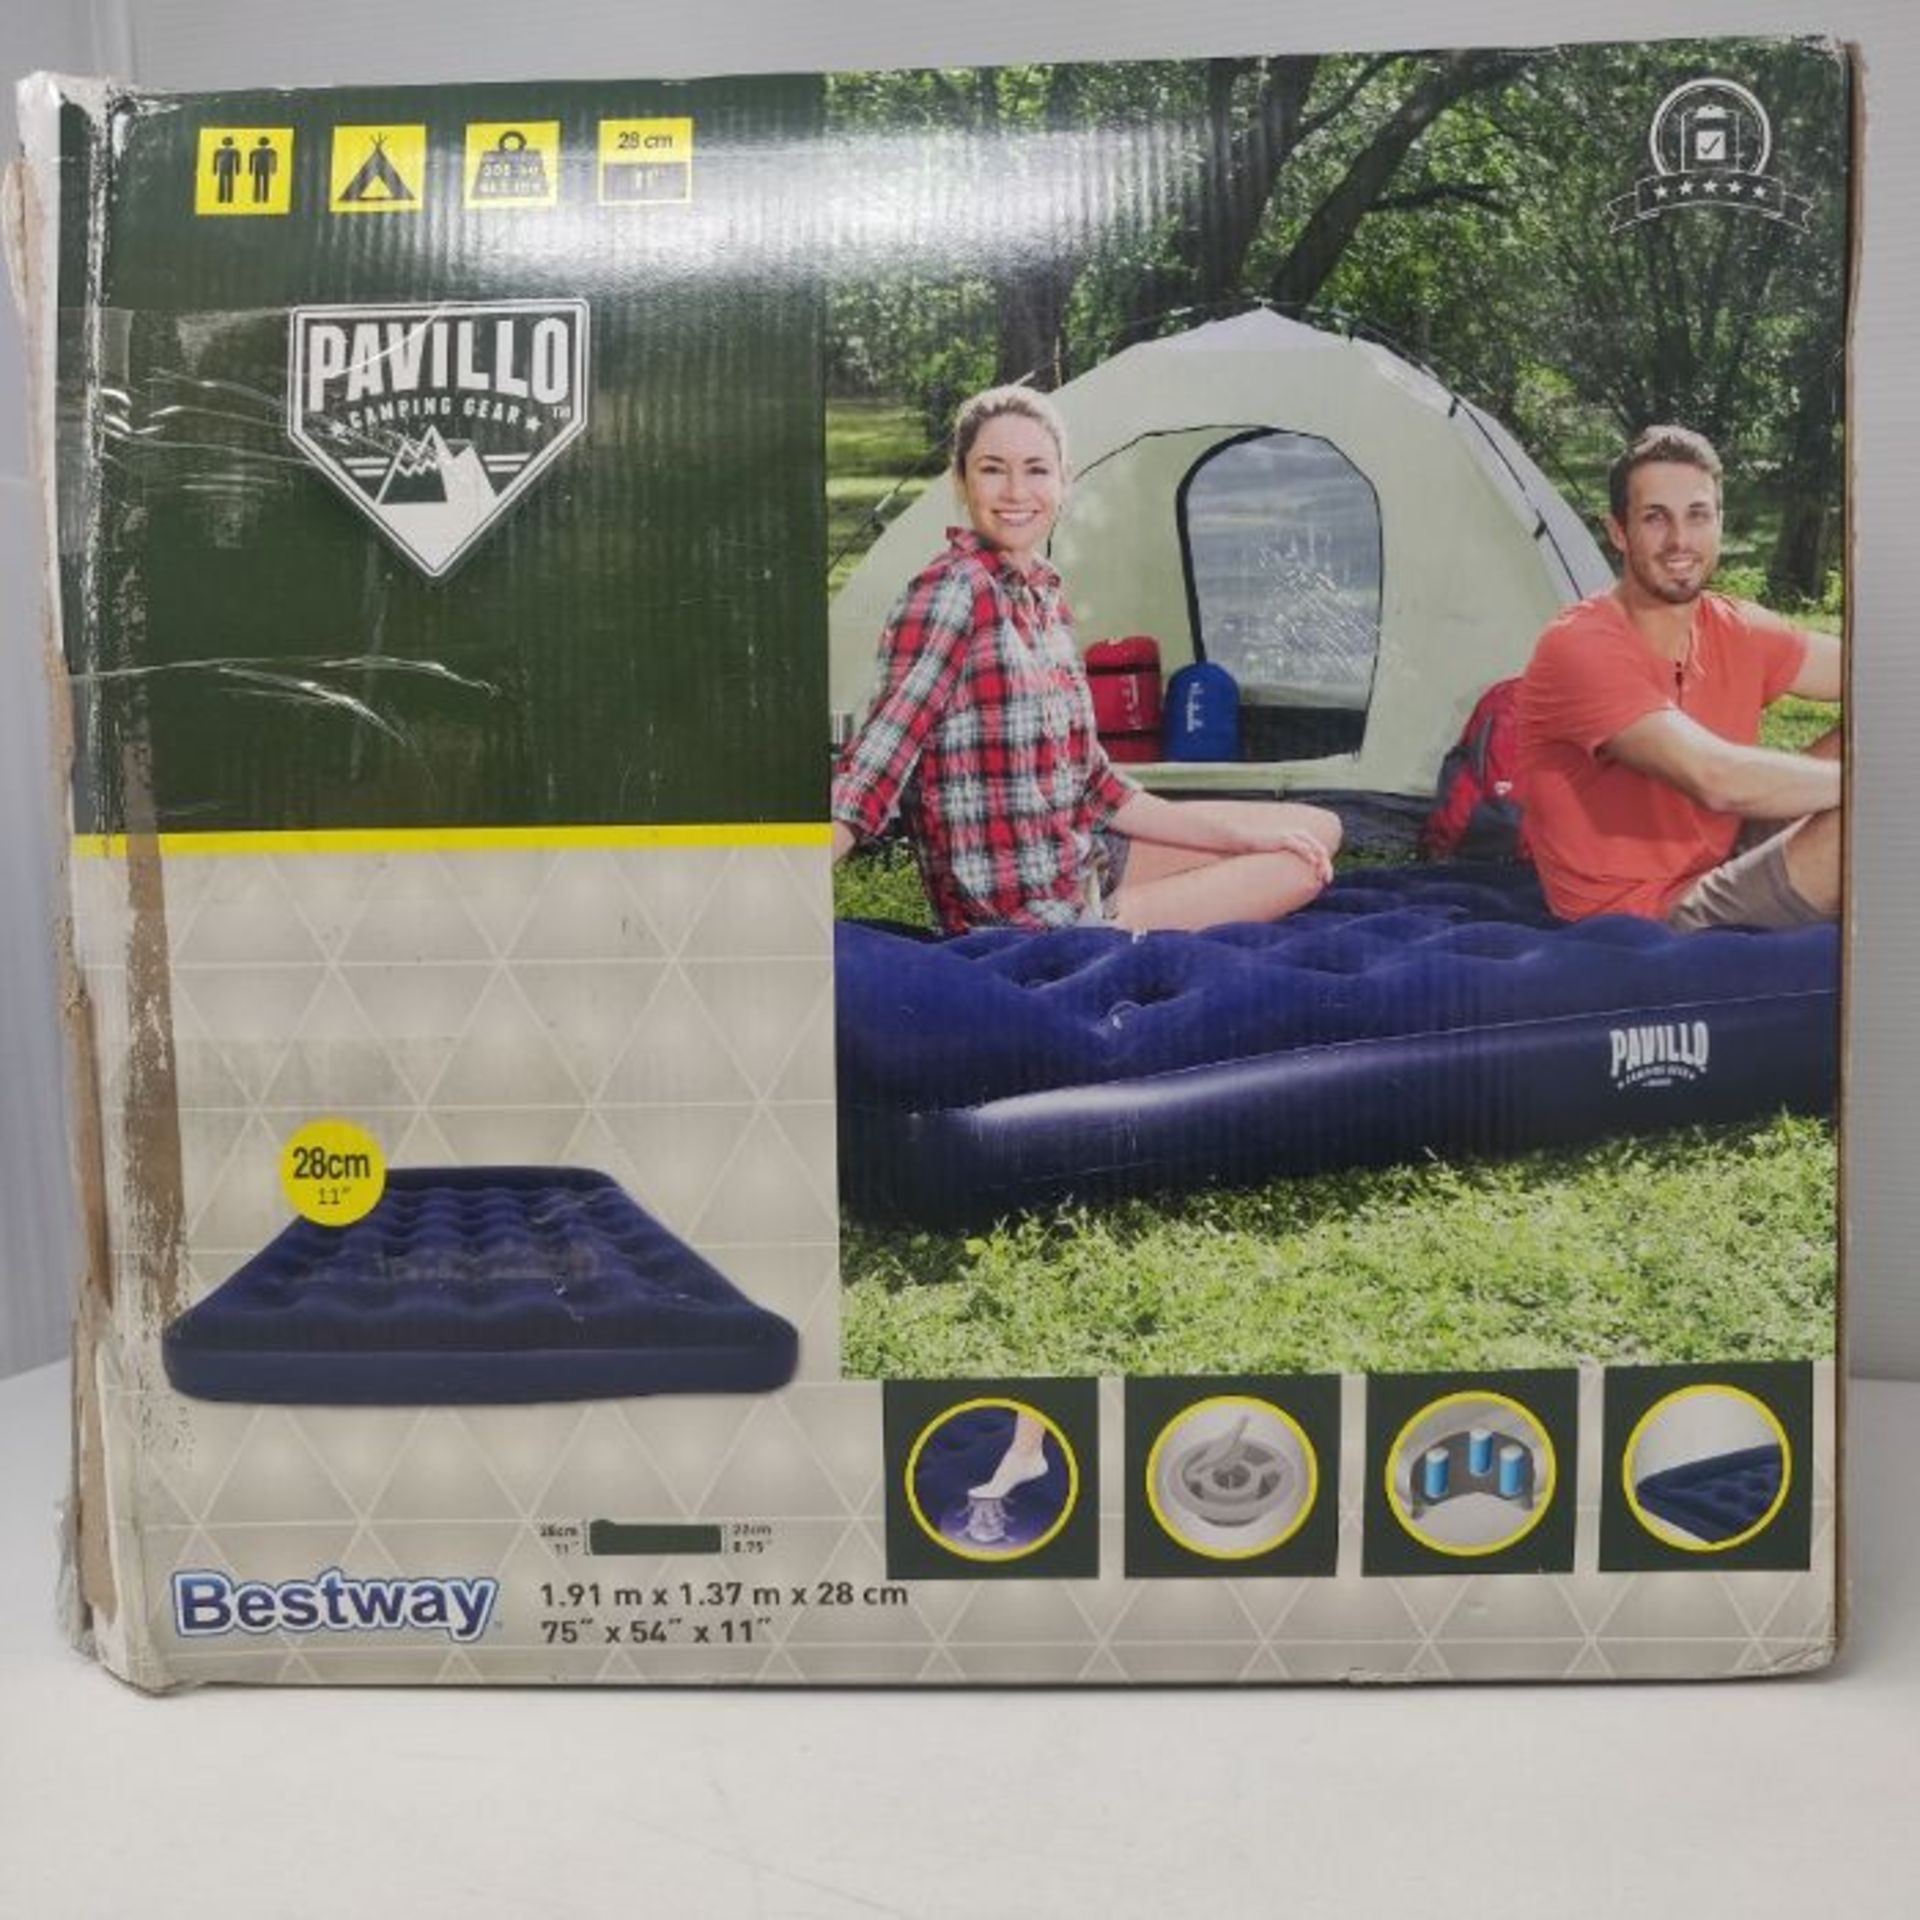 Pavillo Airbed Quick Inflation Outdoor Camping Air Mattress with Built-In Foot Pump, B - Image 2 of 2